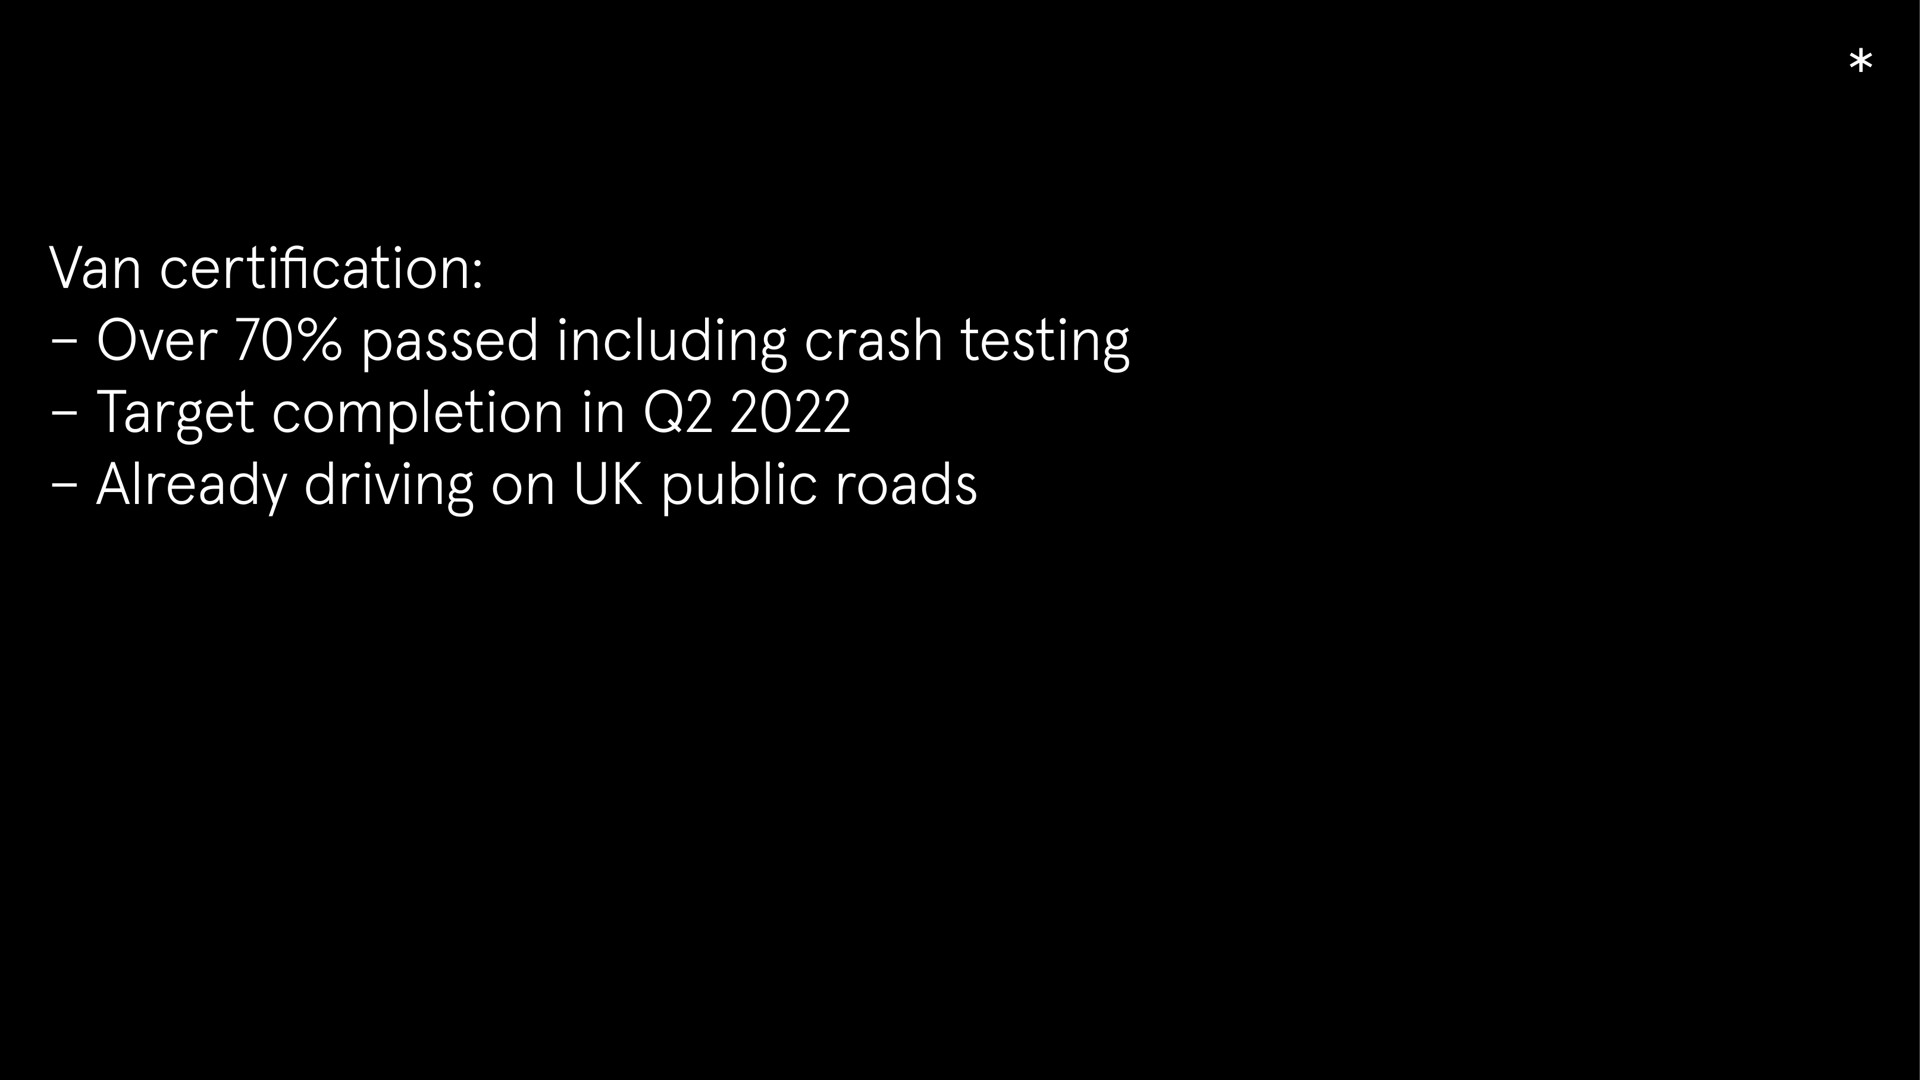 van certification over passed including crash testing target completion in already driving on public roads | Arrival